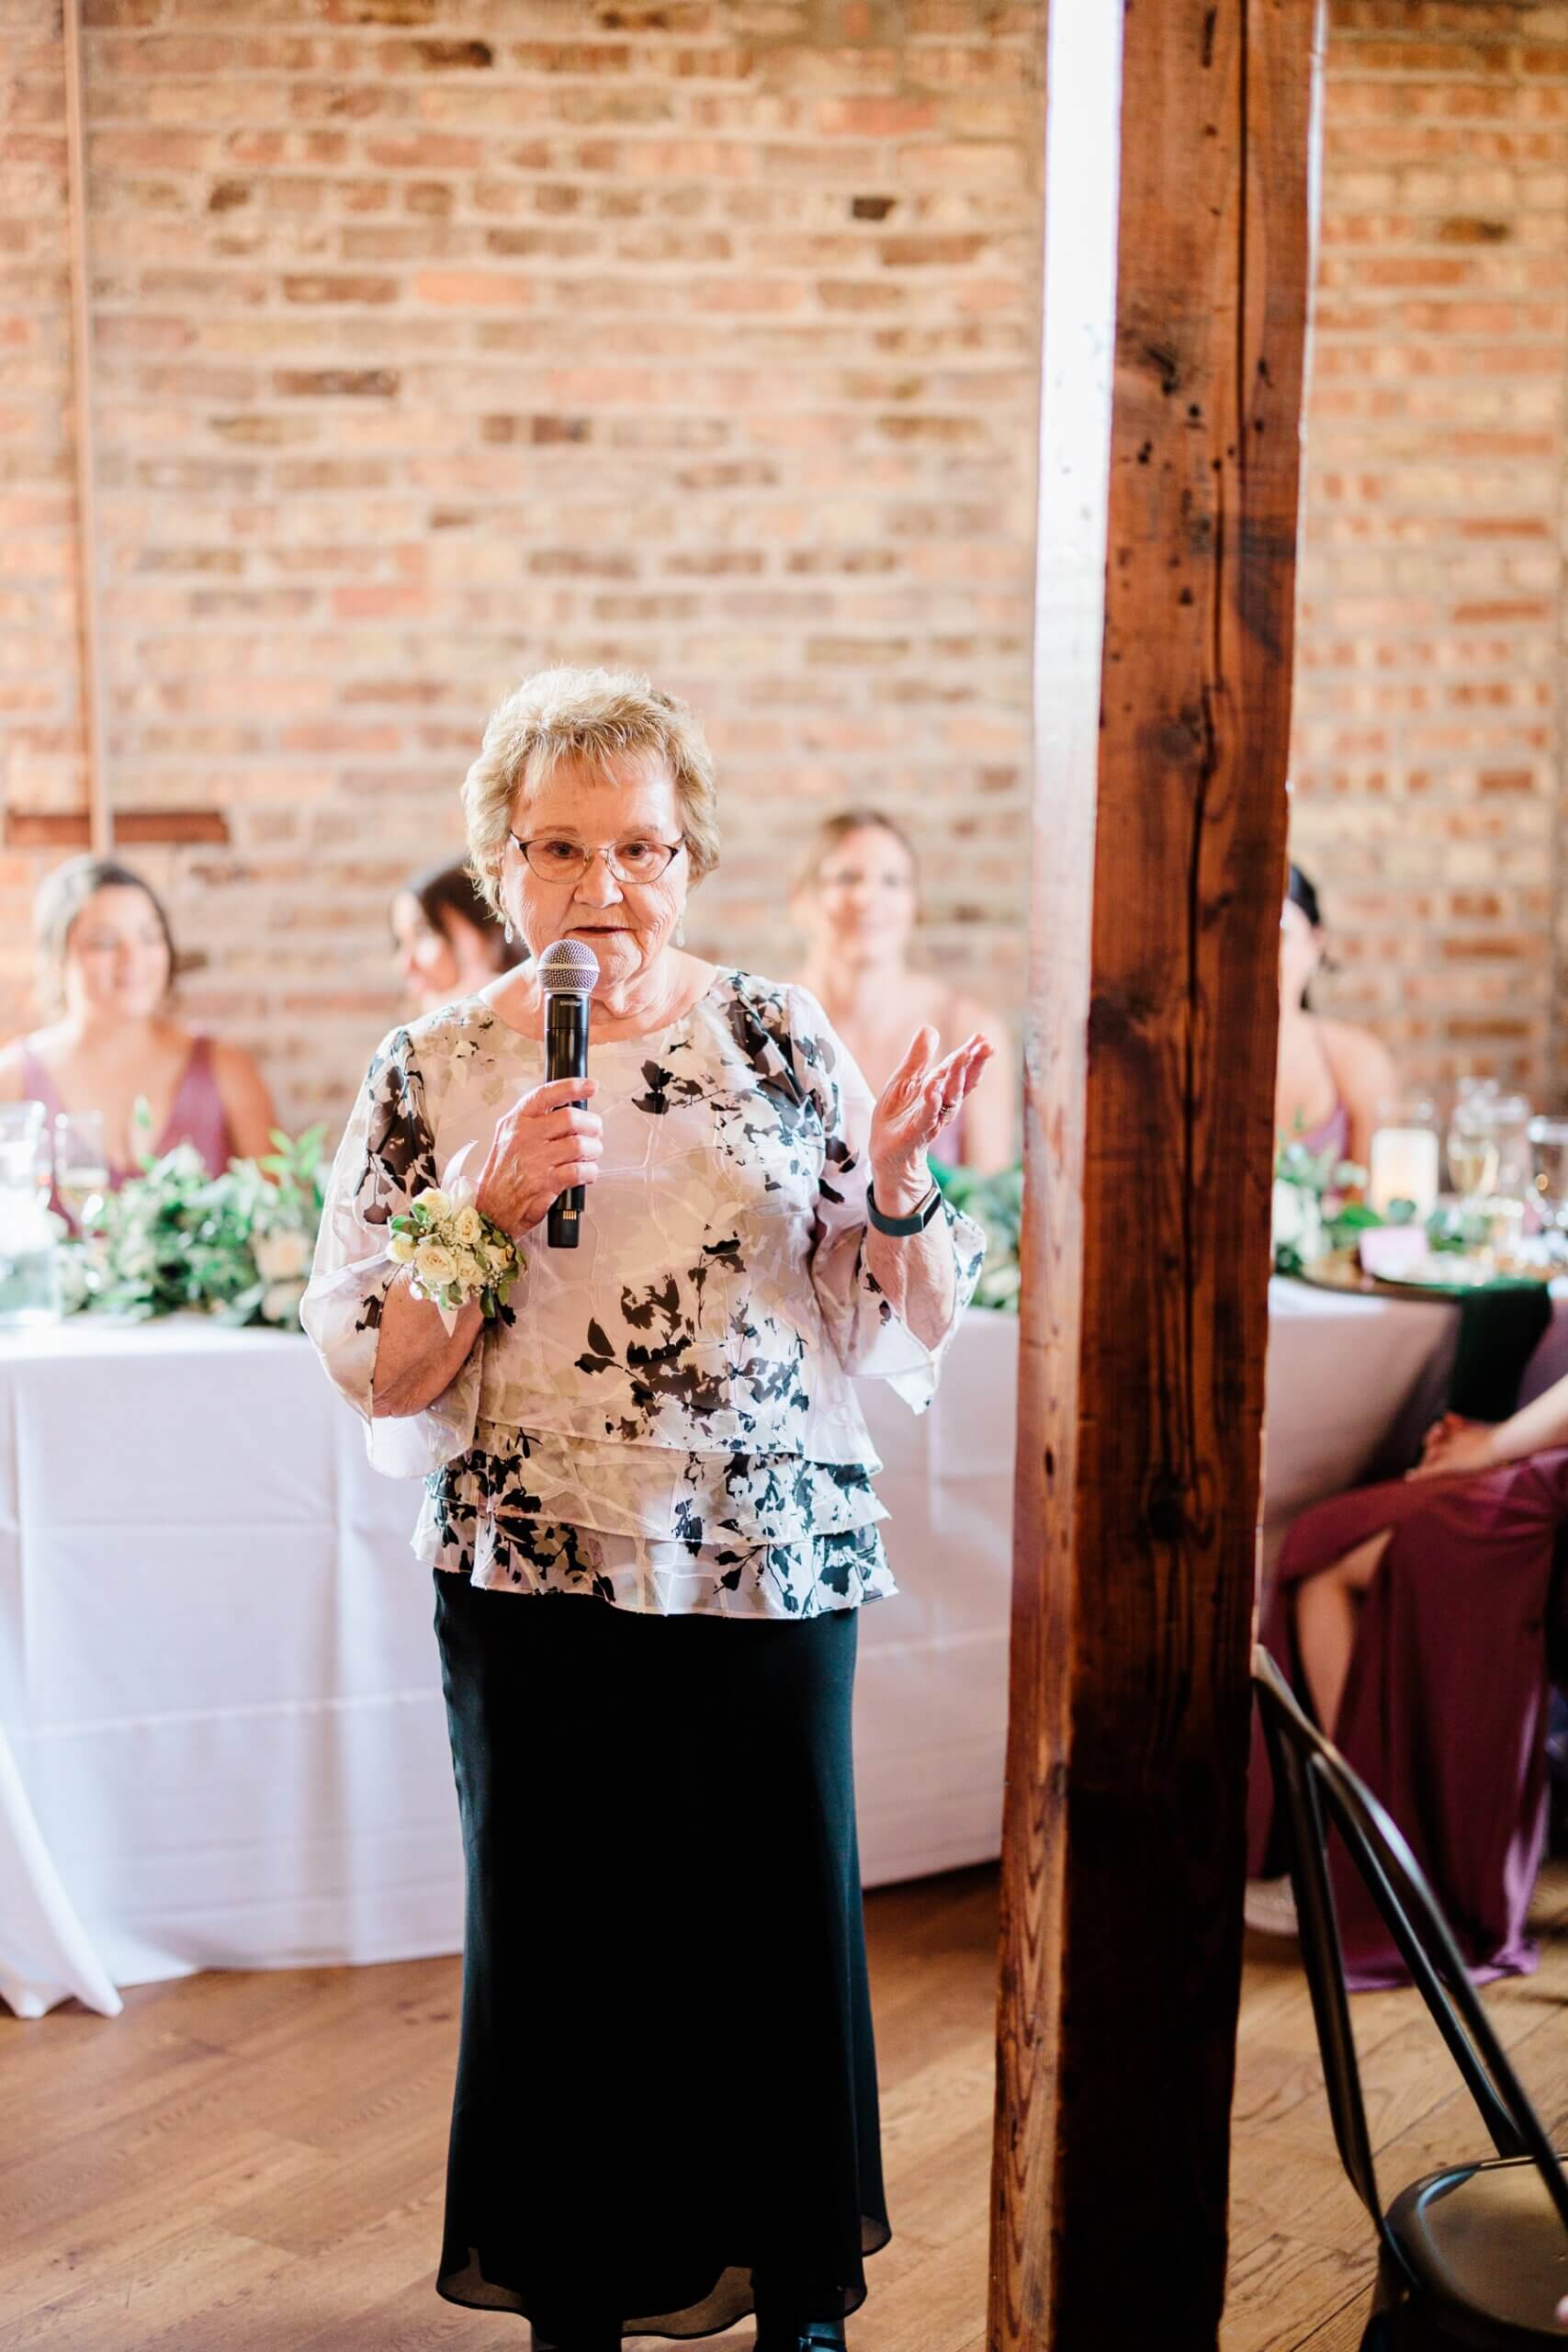 Bride's grandmother giving blessing at wedding reception